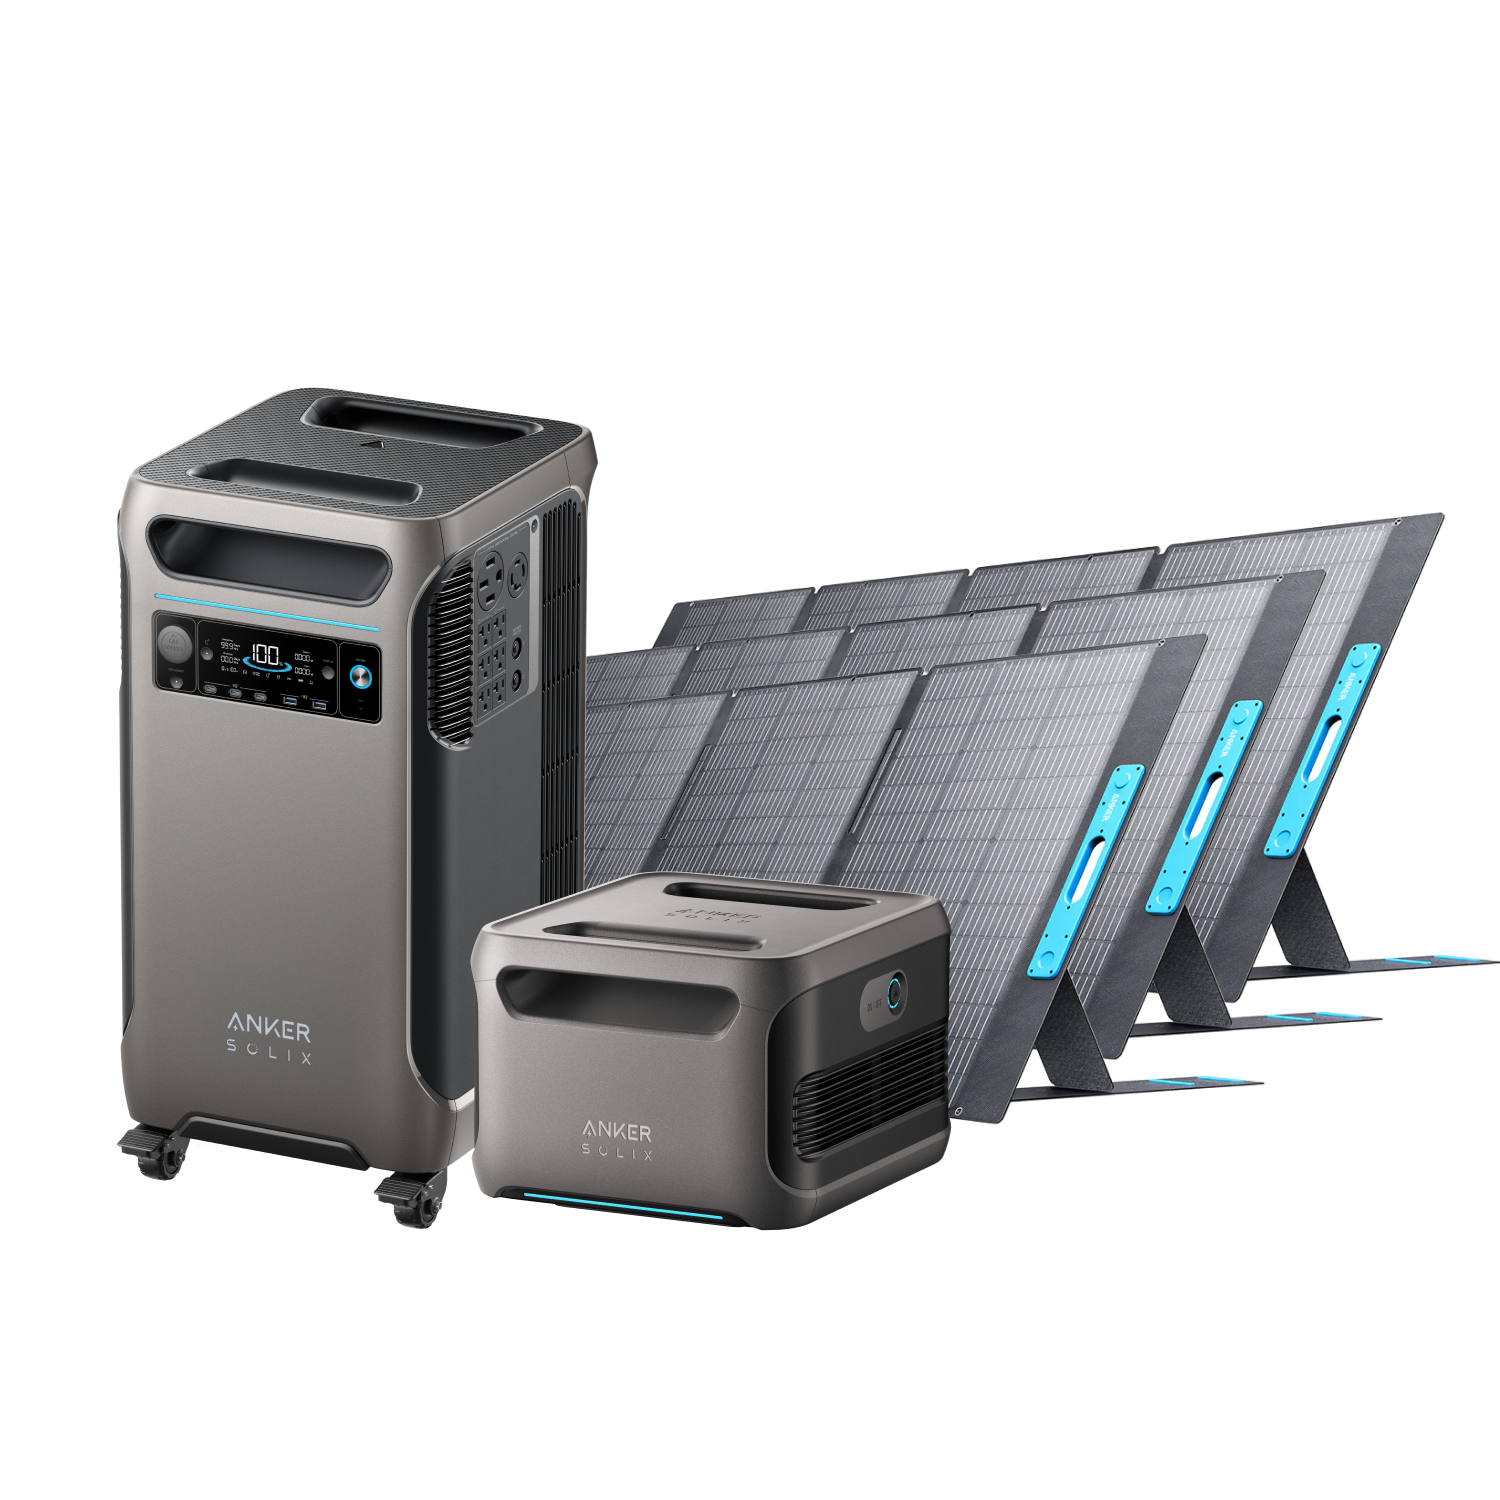 Anker SOLIX B179011K F3800 - 3840Wh Portable Power Station w/ 3840Wh  Expansion Battery & Manual Transfer Switch